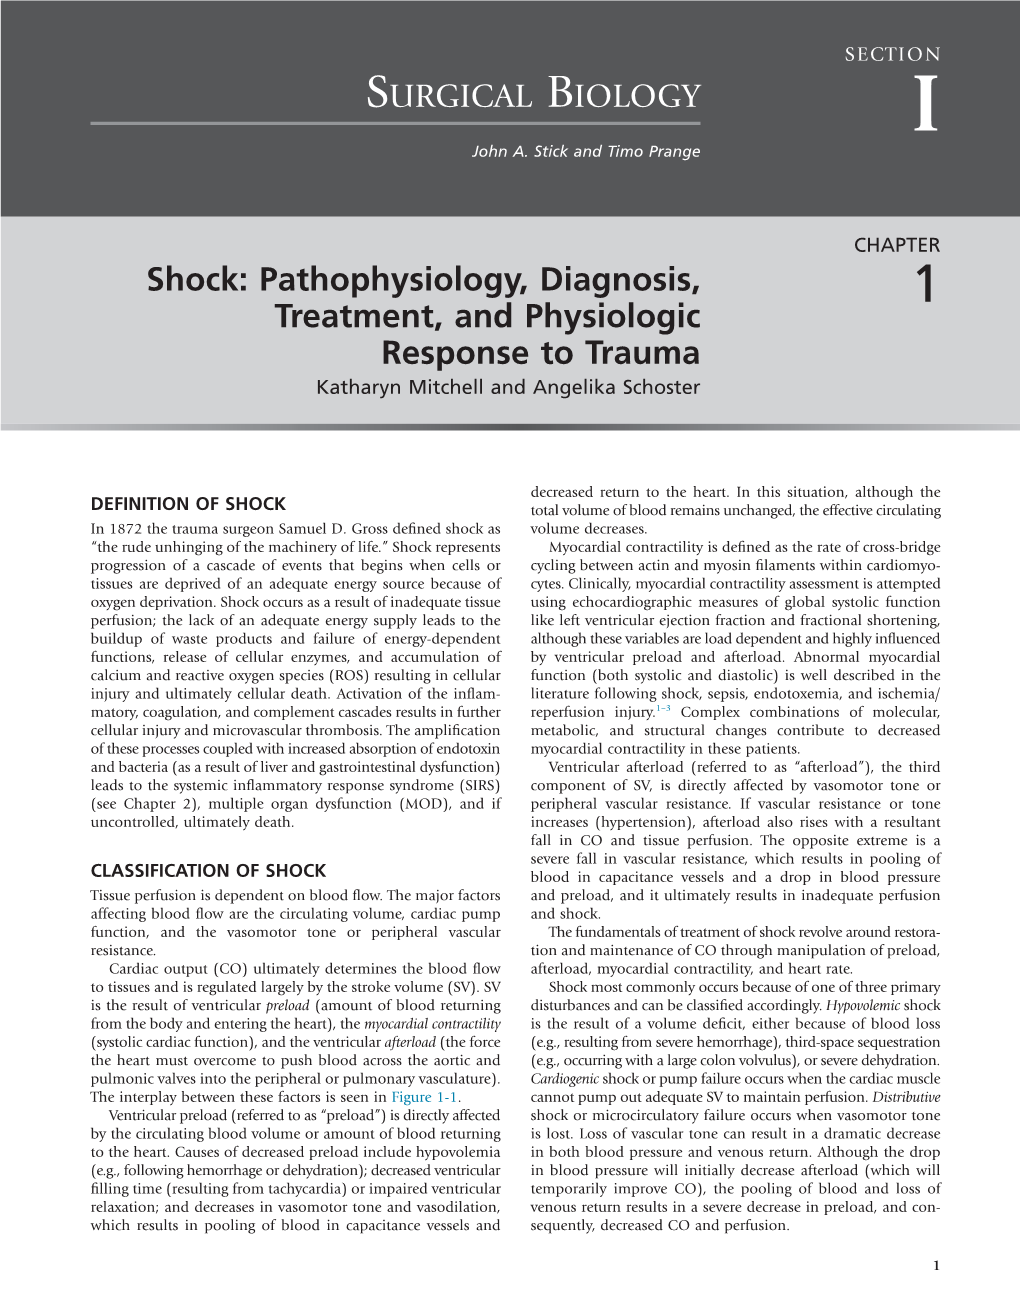 Shock: Pathophysiology, Diagnosis, 1 Treatment, and Physiologic Response to Trauma Katharyn Mitchell and Angelika Schoster